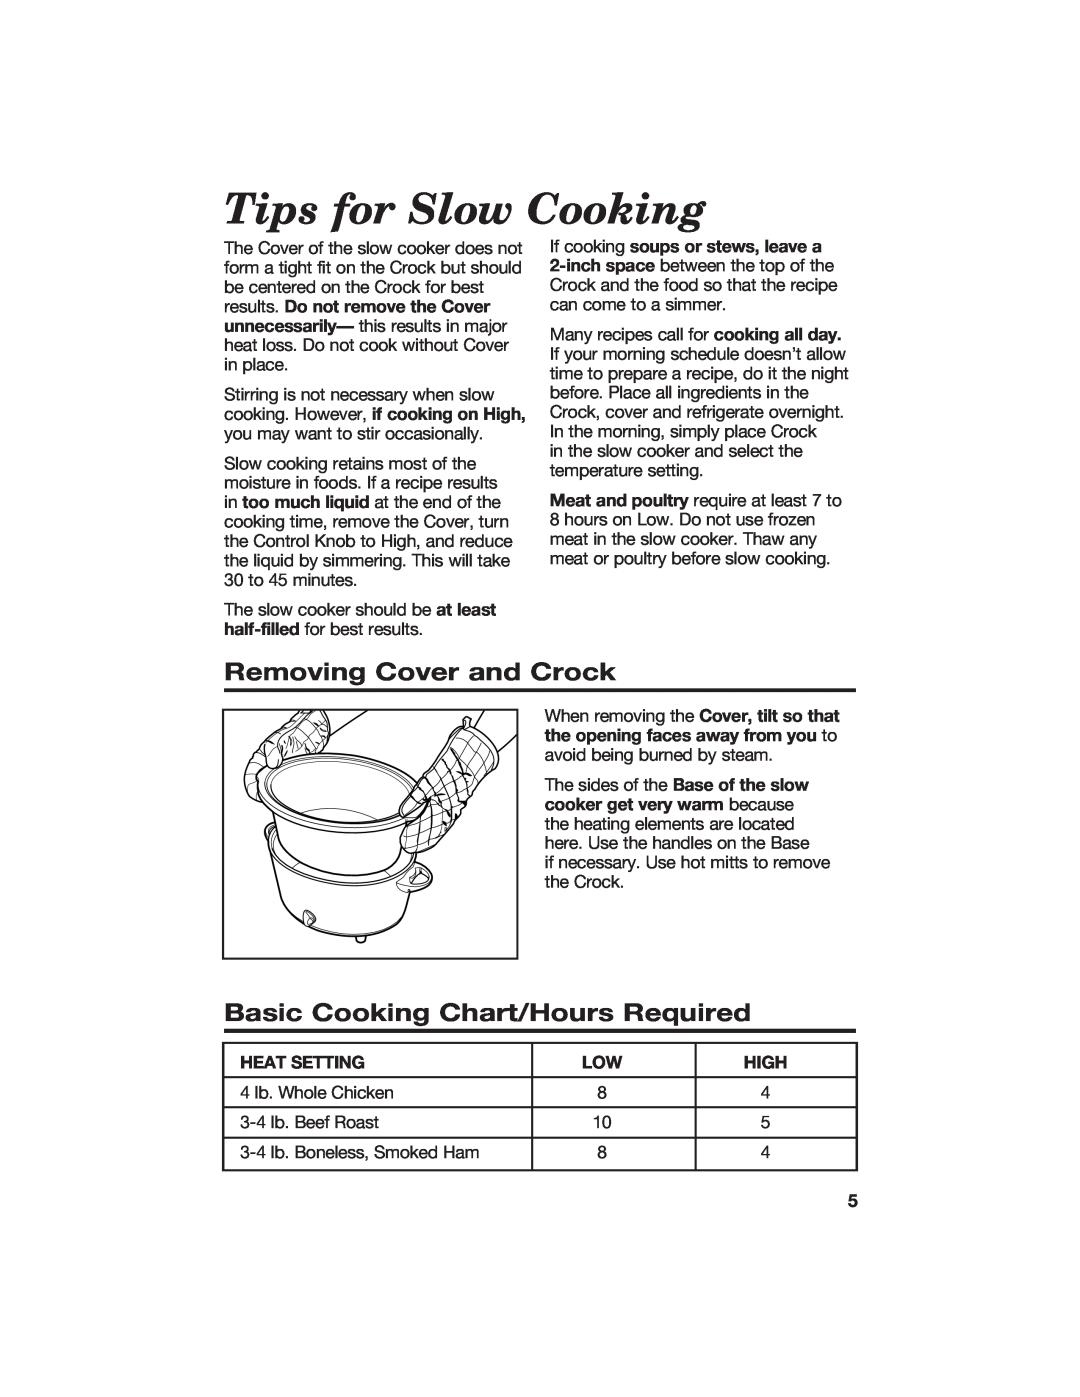 Hamilton Beach 840056100 Tips for Slow Cooking, Removing Cover and Crock, Basic Cooking Chart/Hours Required, Heat Setting 